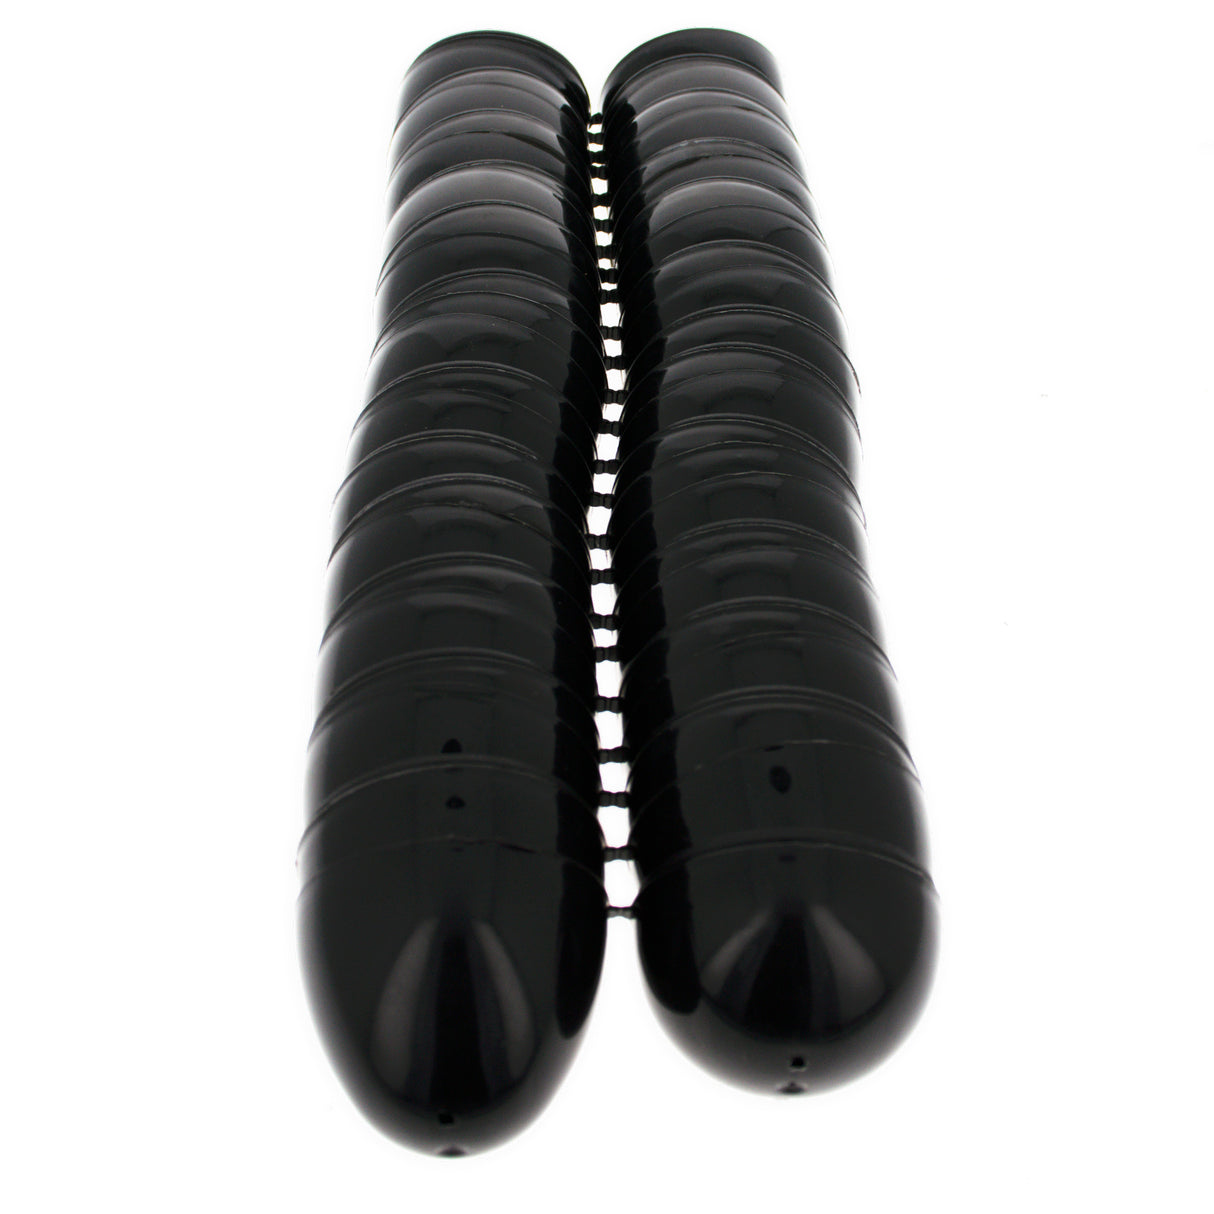 Set of 24 Shiny Glossy Black Plastic Easter Eggs, Each 2.25 Inches ,dimensions in inches: 2.25 x 1.65 x 1.65